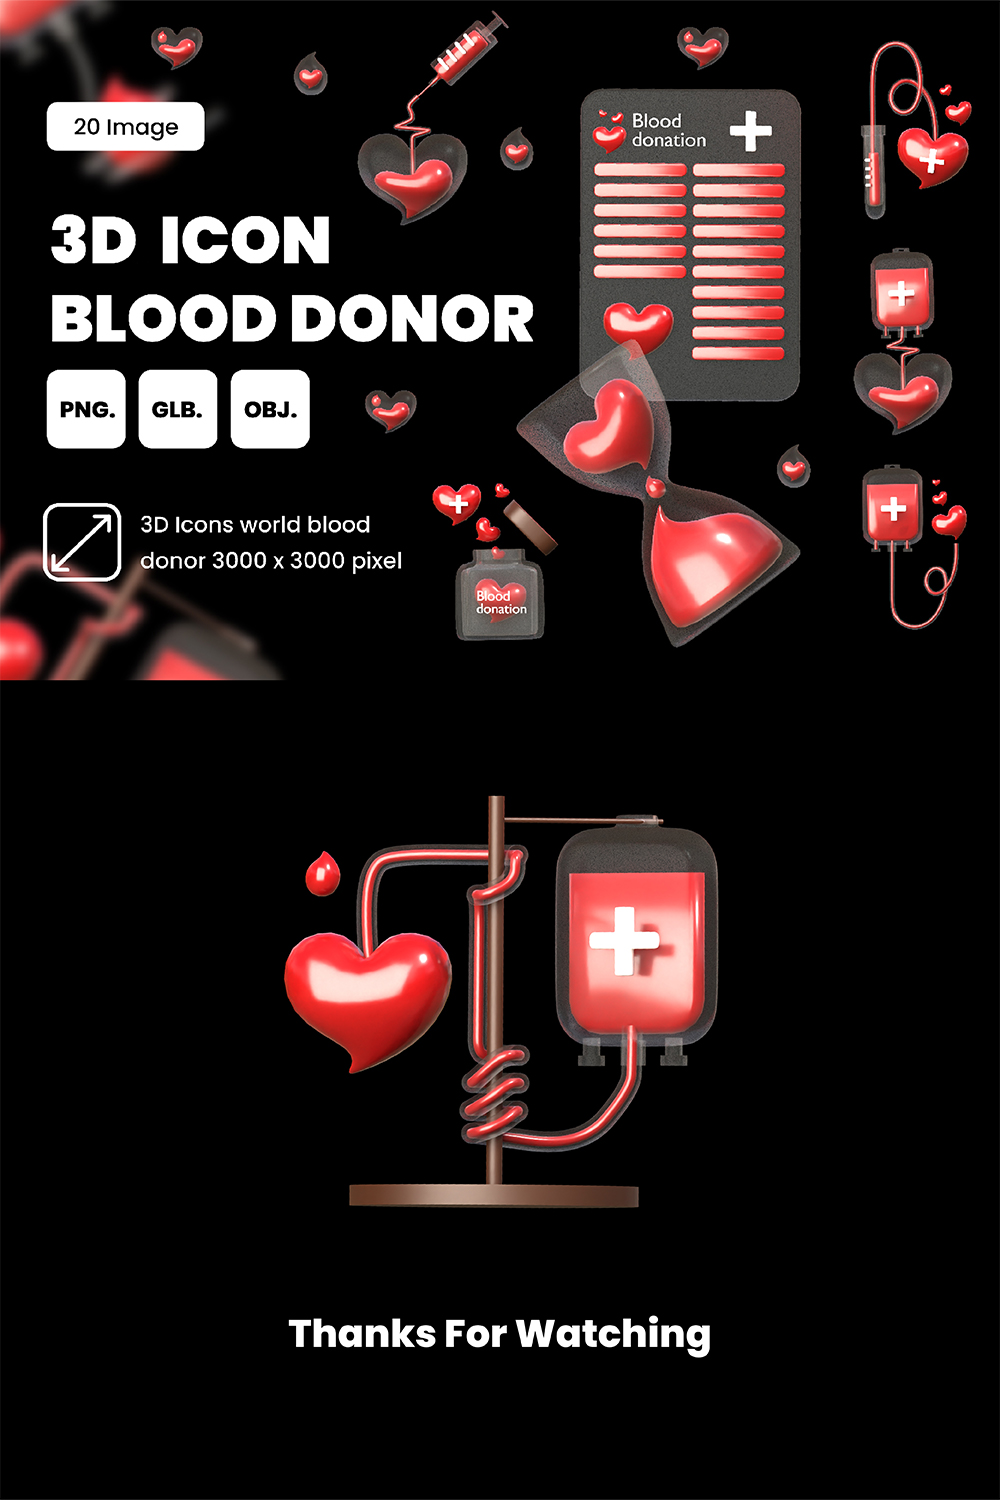 3d icon blood donor pinterest preview image.